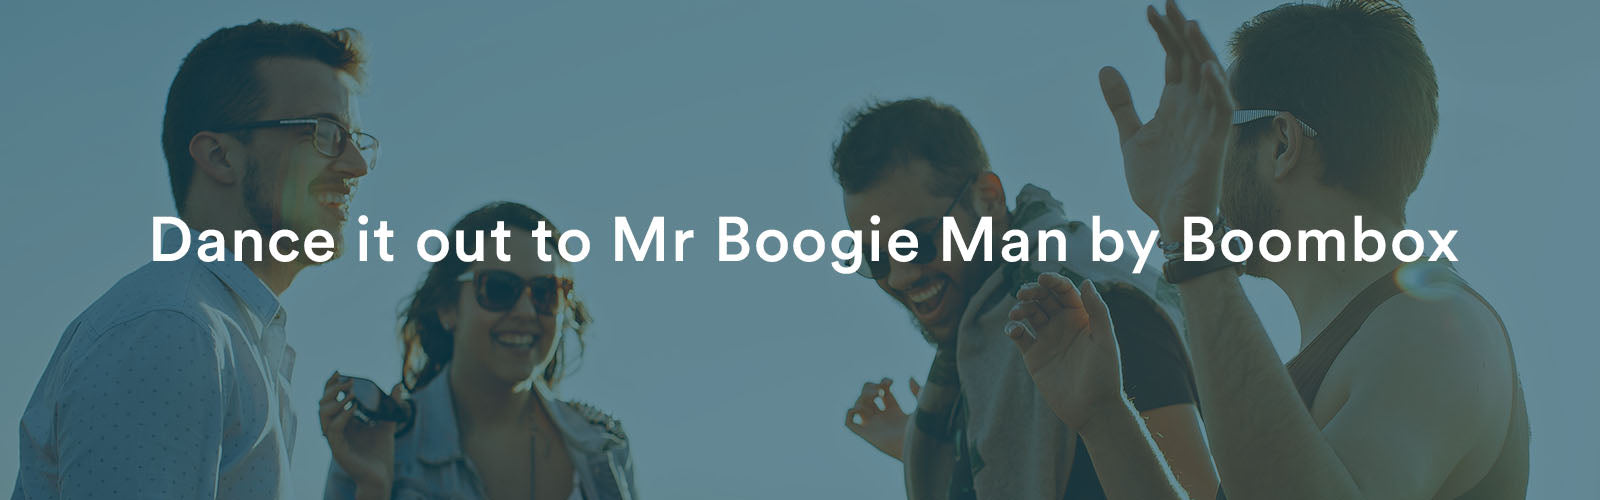 Dance it out to Mr Boogie Man by Boombox